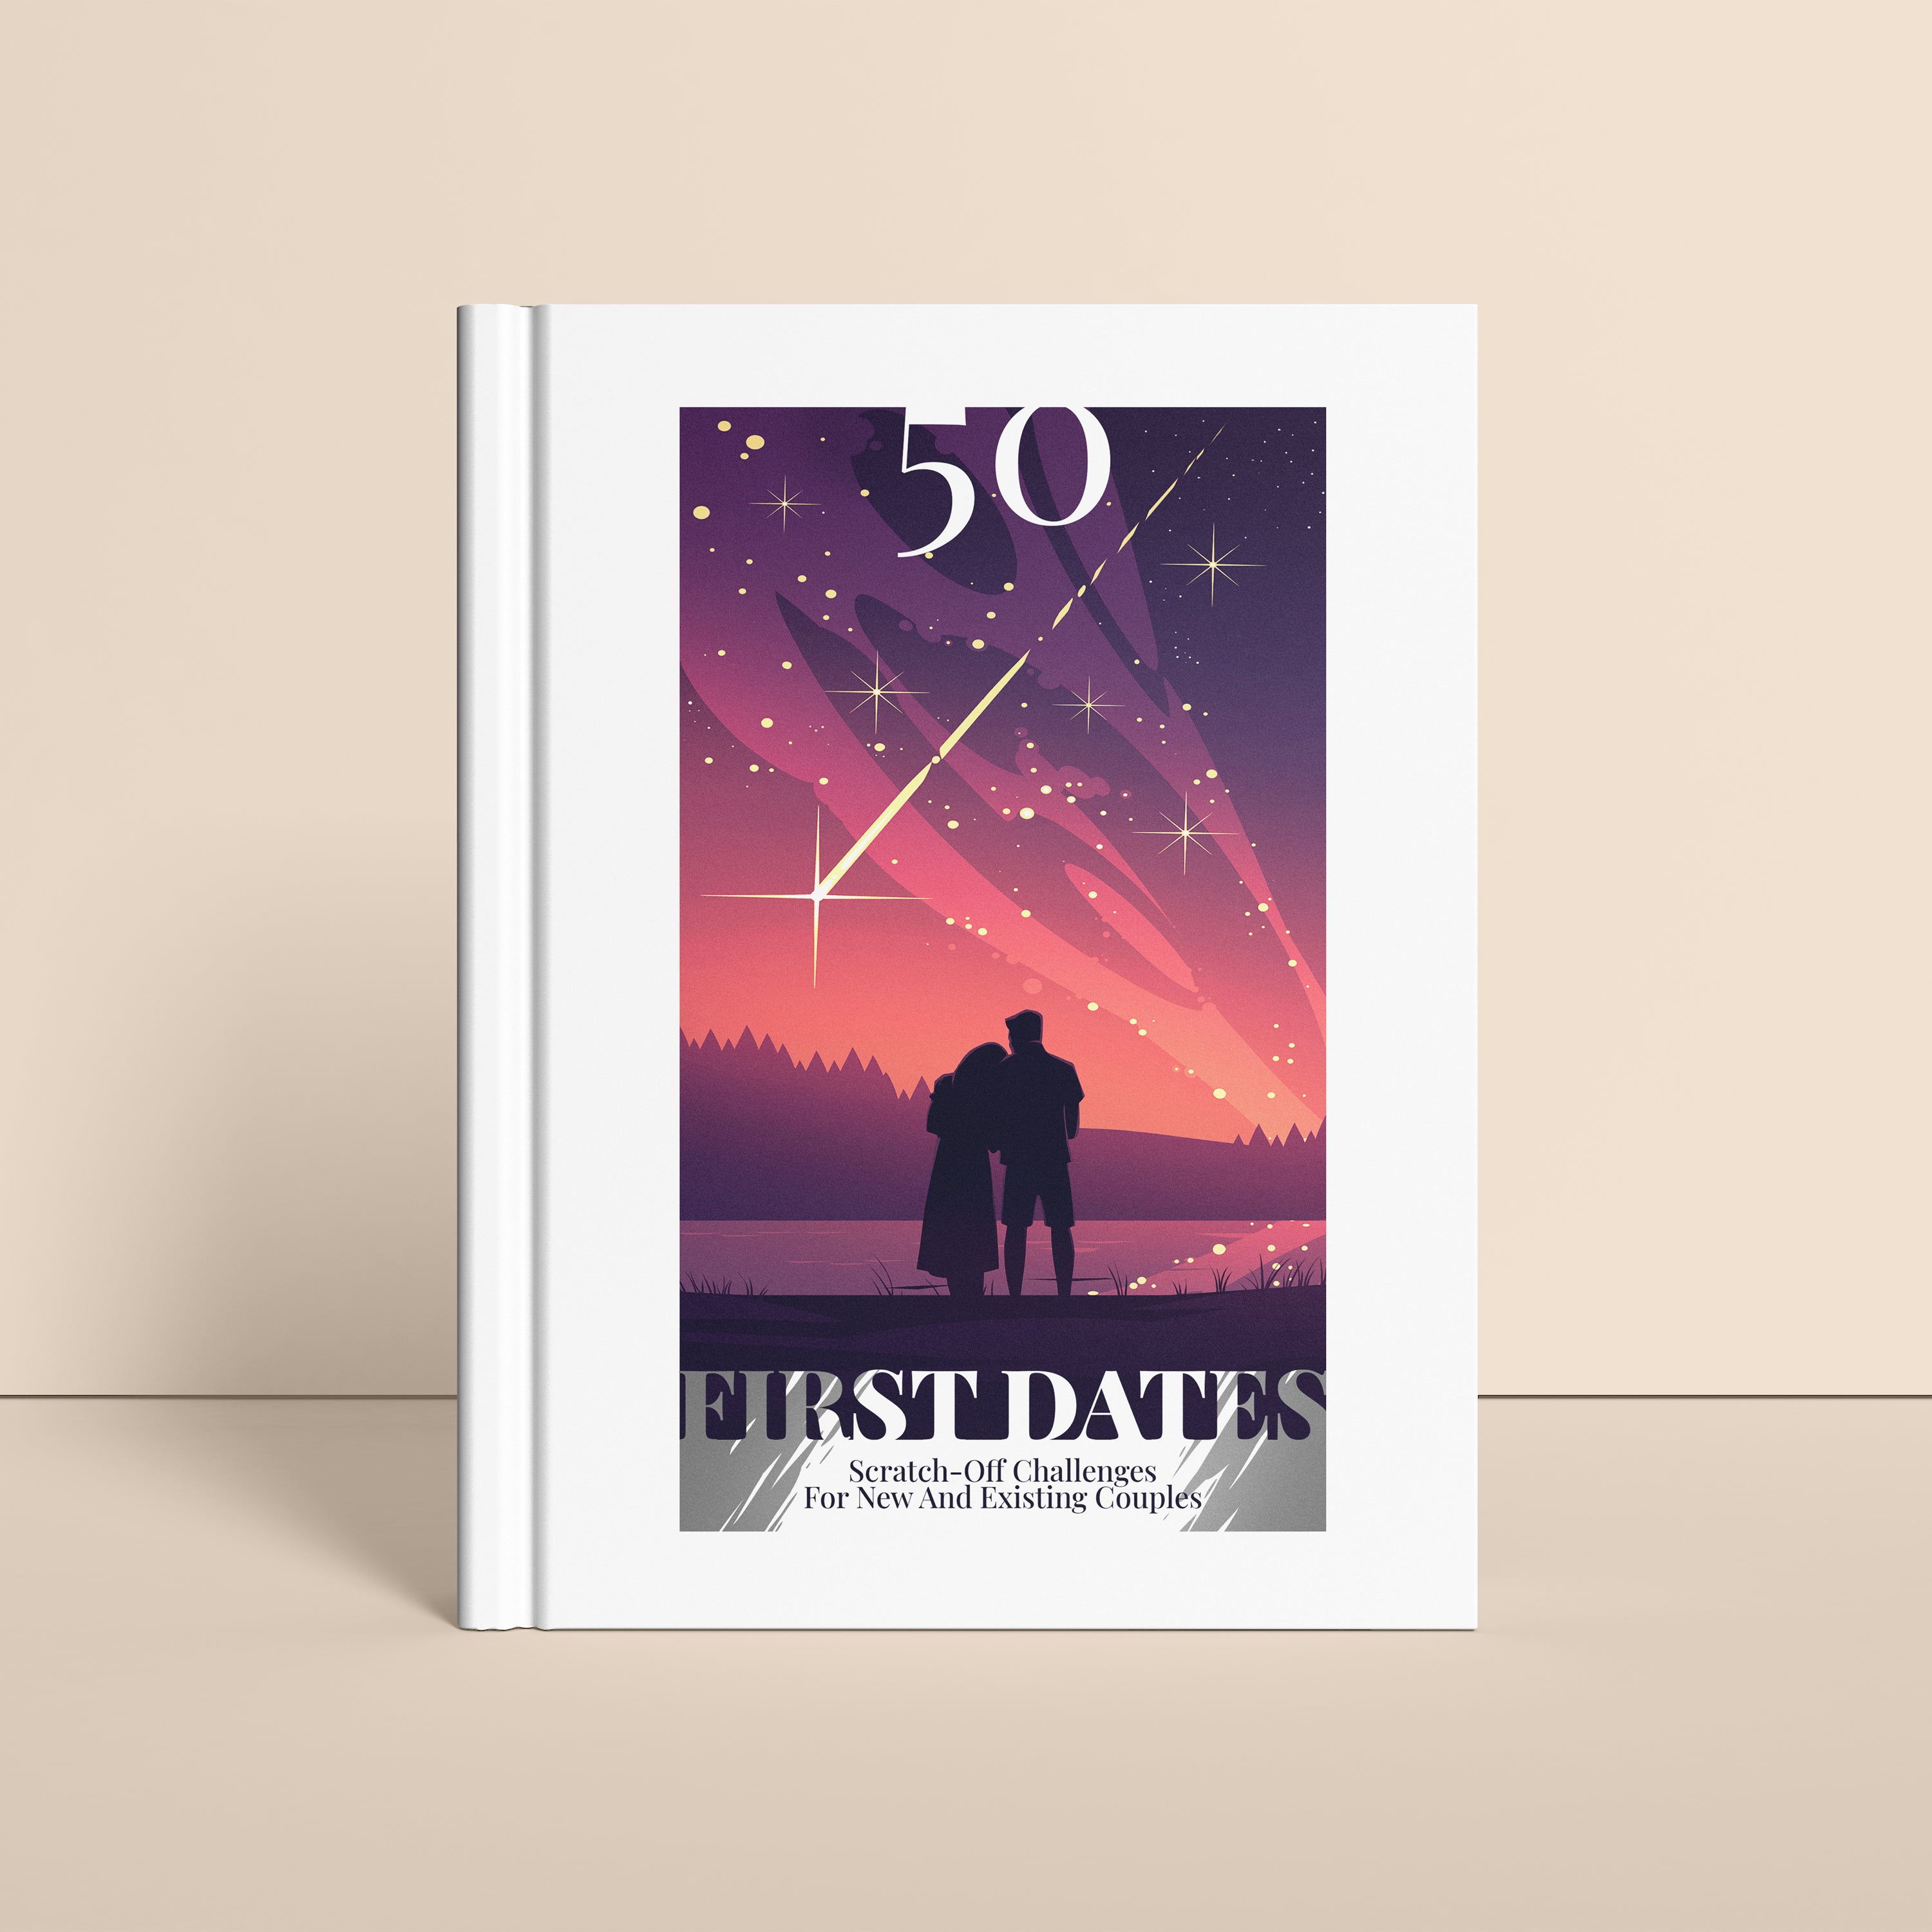 50 First Dates Scratch Off Dating Book - Cover Image